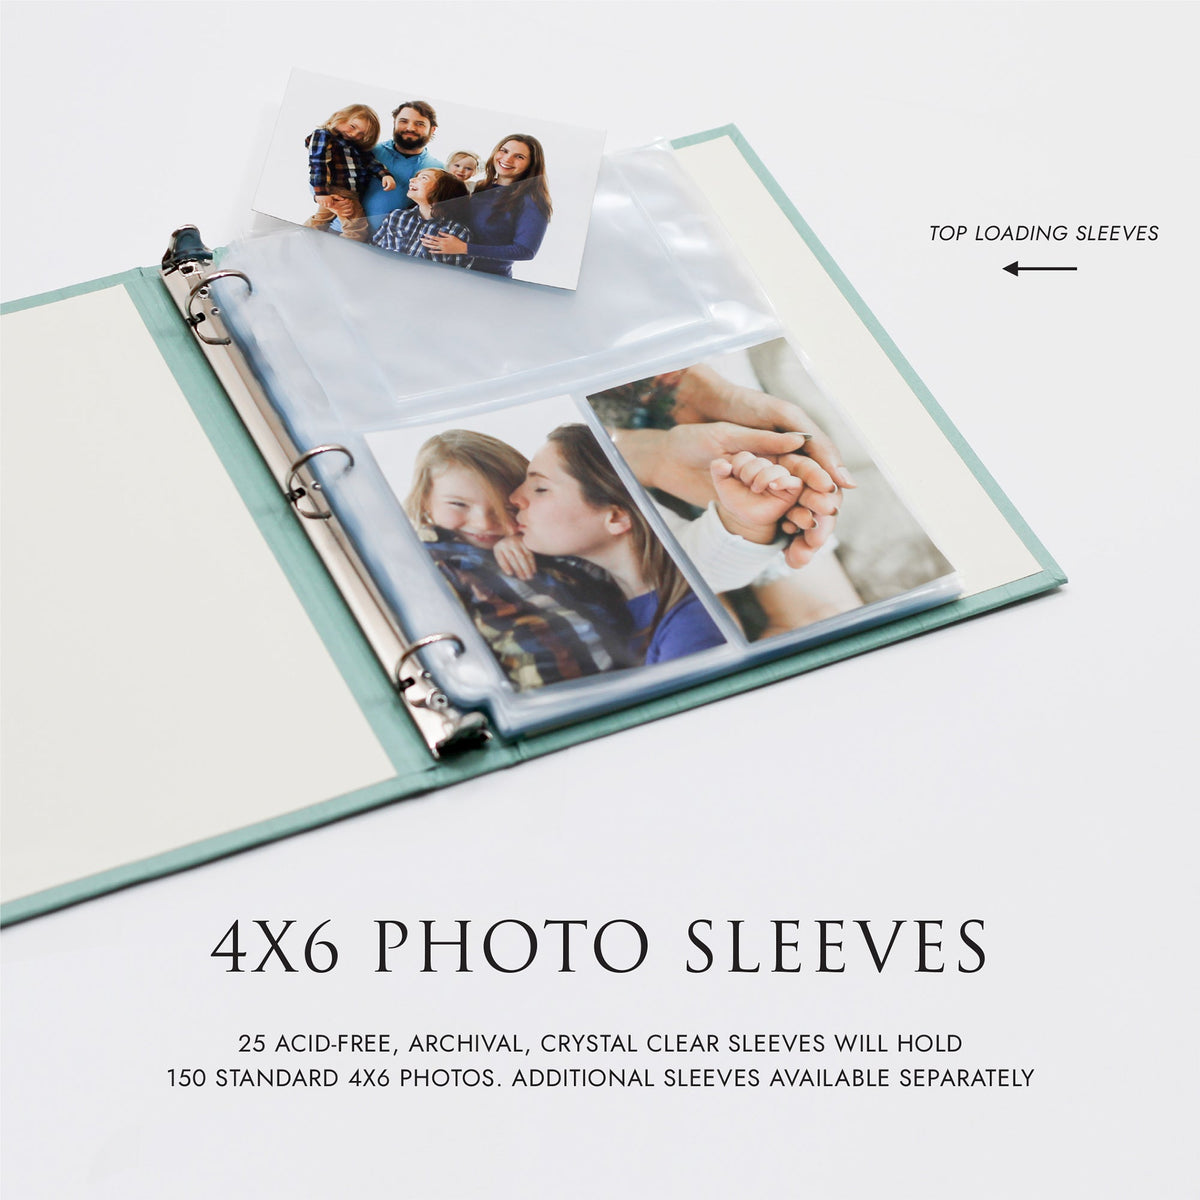 Large Photo Binder For 4x6 Photos | Cover: Celery Cotton | Available Personalized